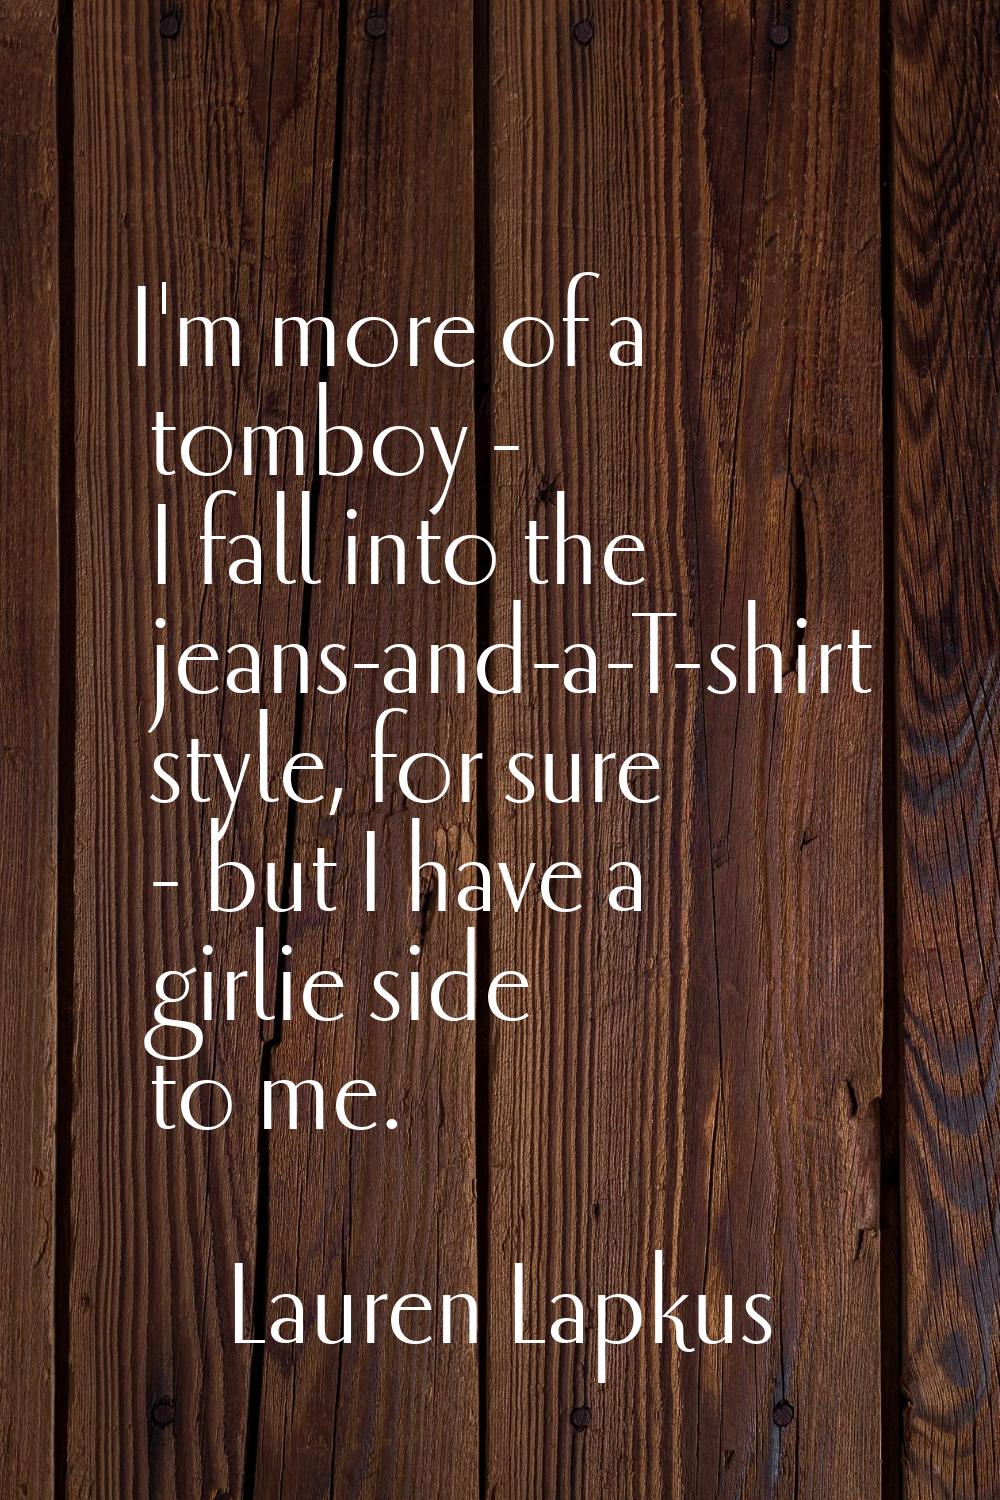 I'm more of a tomboy - I fall into the jeans-and-a-T-shirt style, for sure - but I have a girlie si